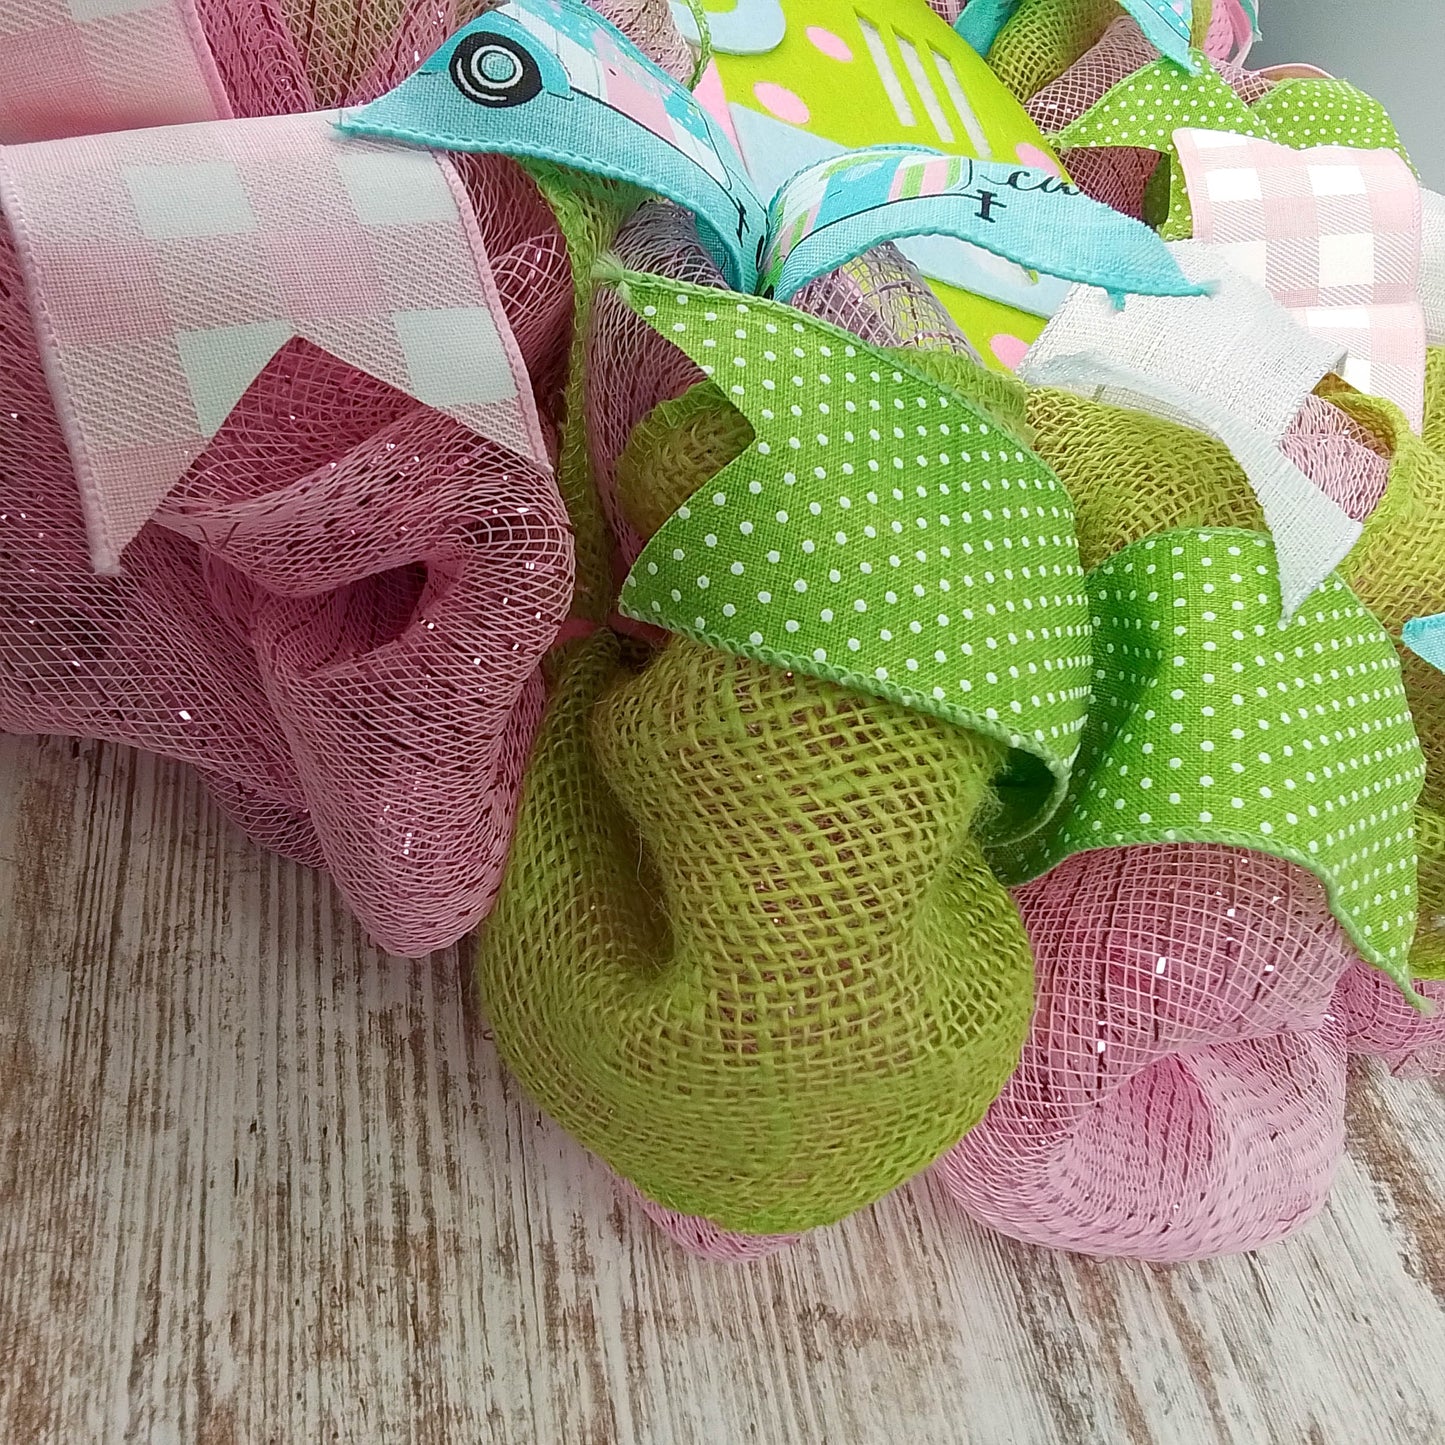 Camper Wreath - Camping Spring Summer Welcome Deco Mesh Wreath - Pink Turquoise Lime Green